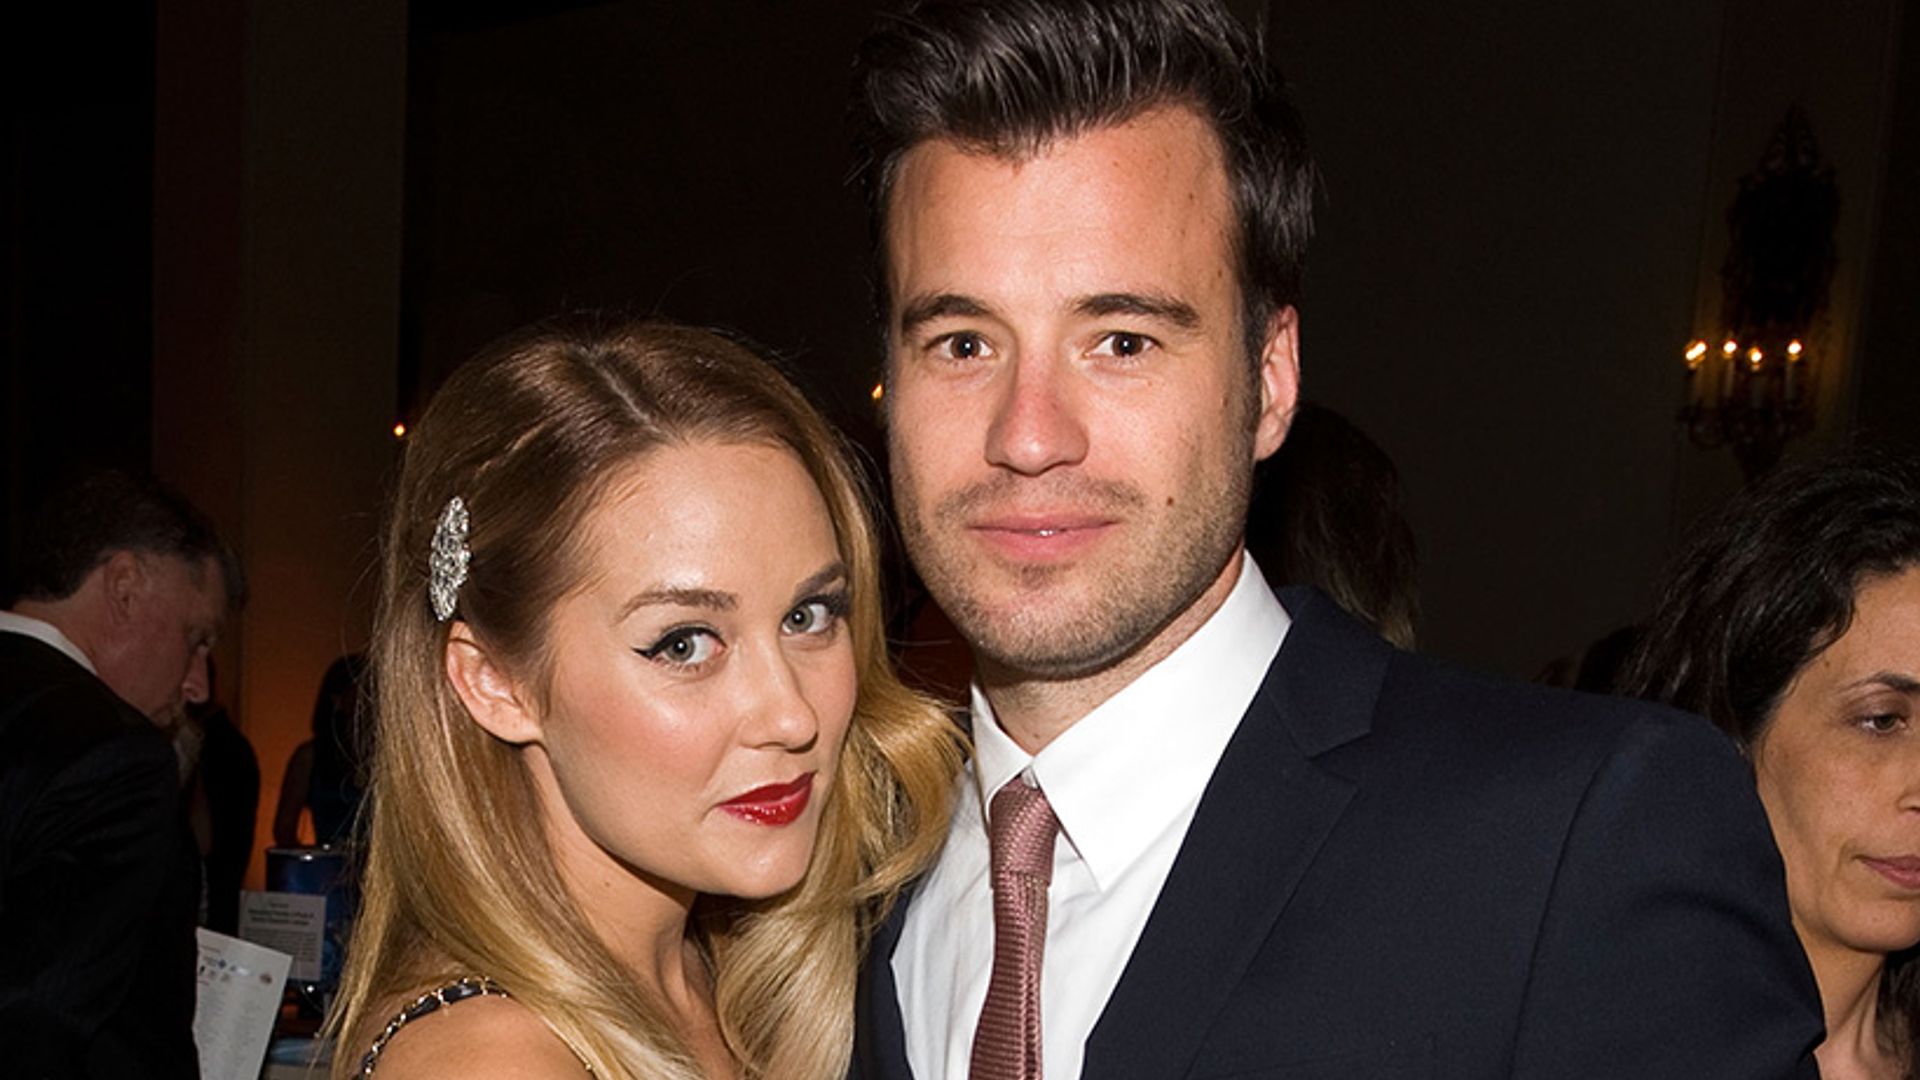 Lauren Conrad welcomes her first child with husband William Tell